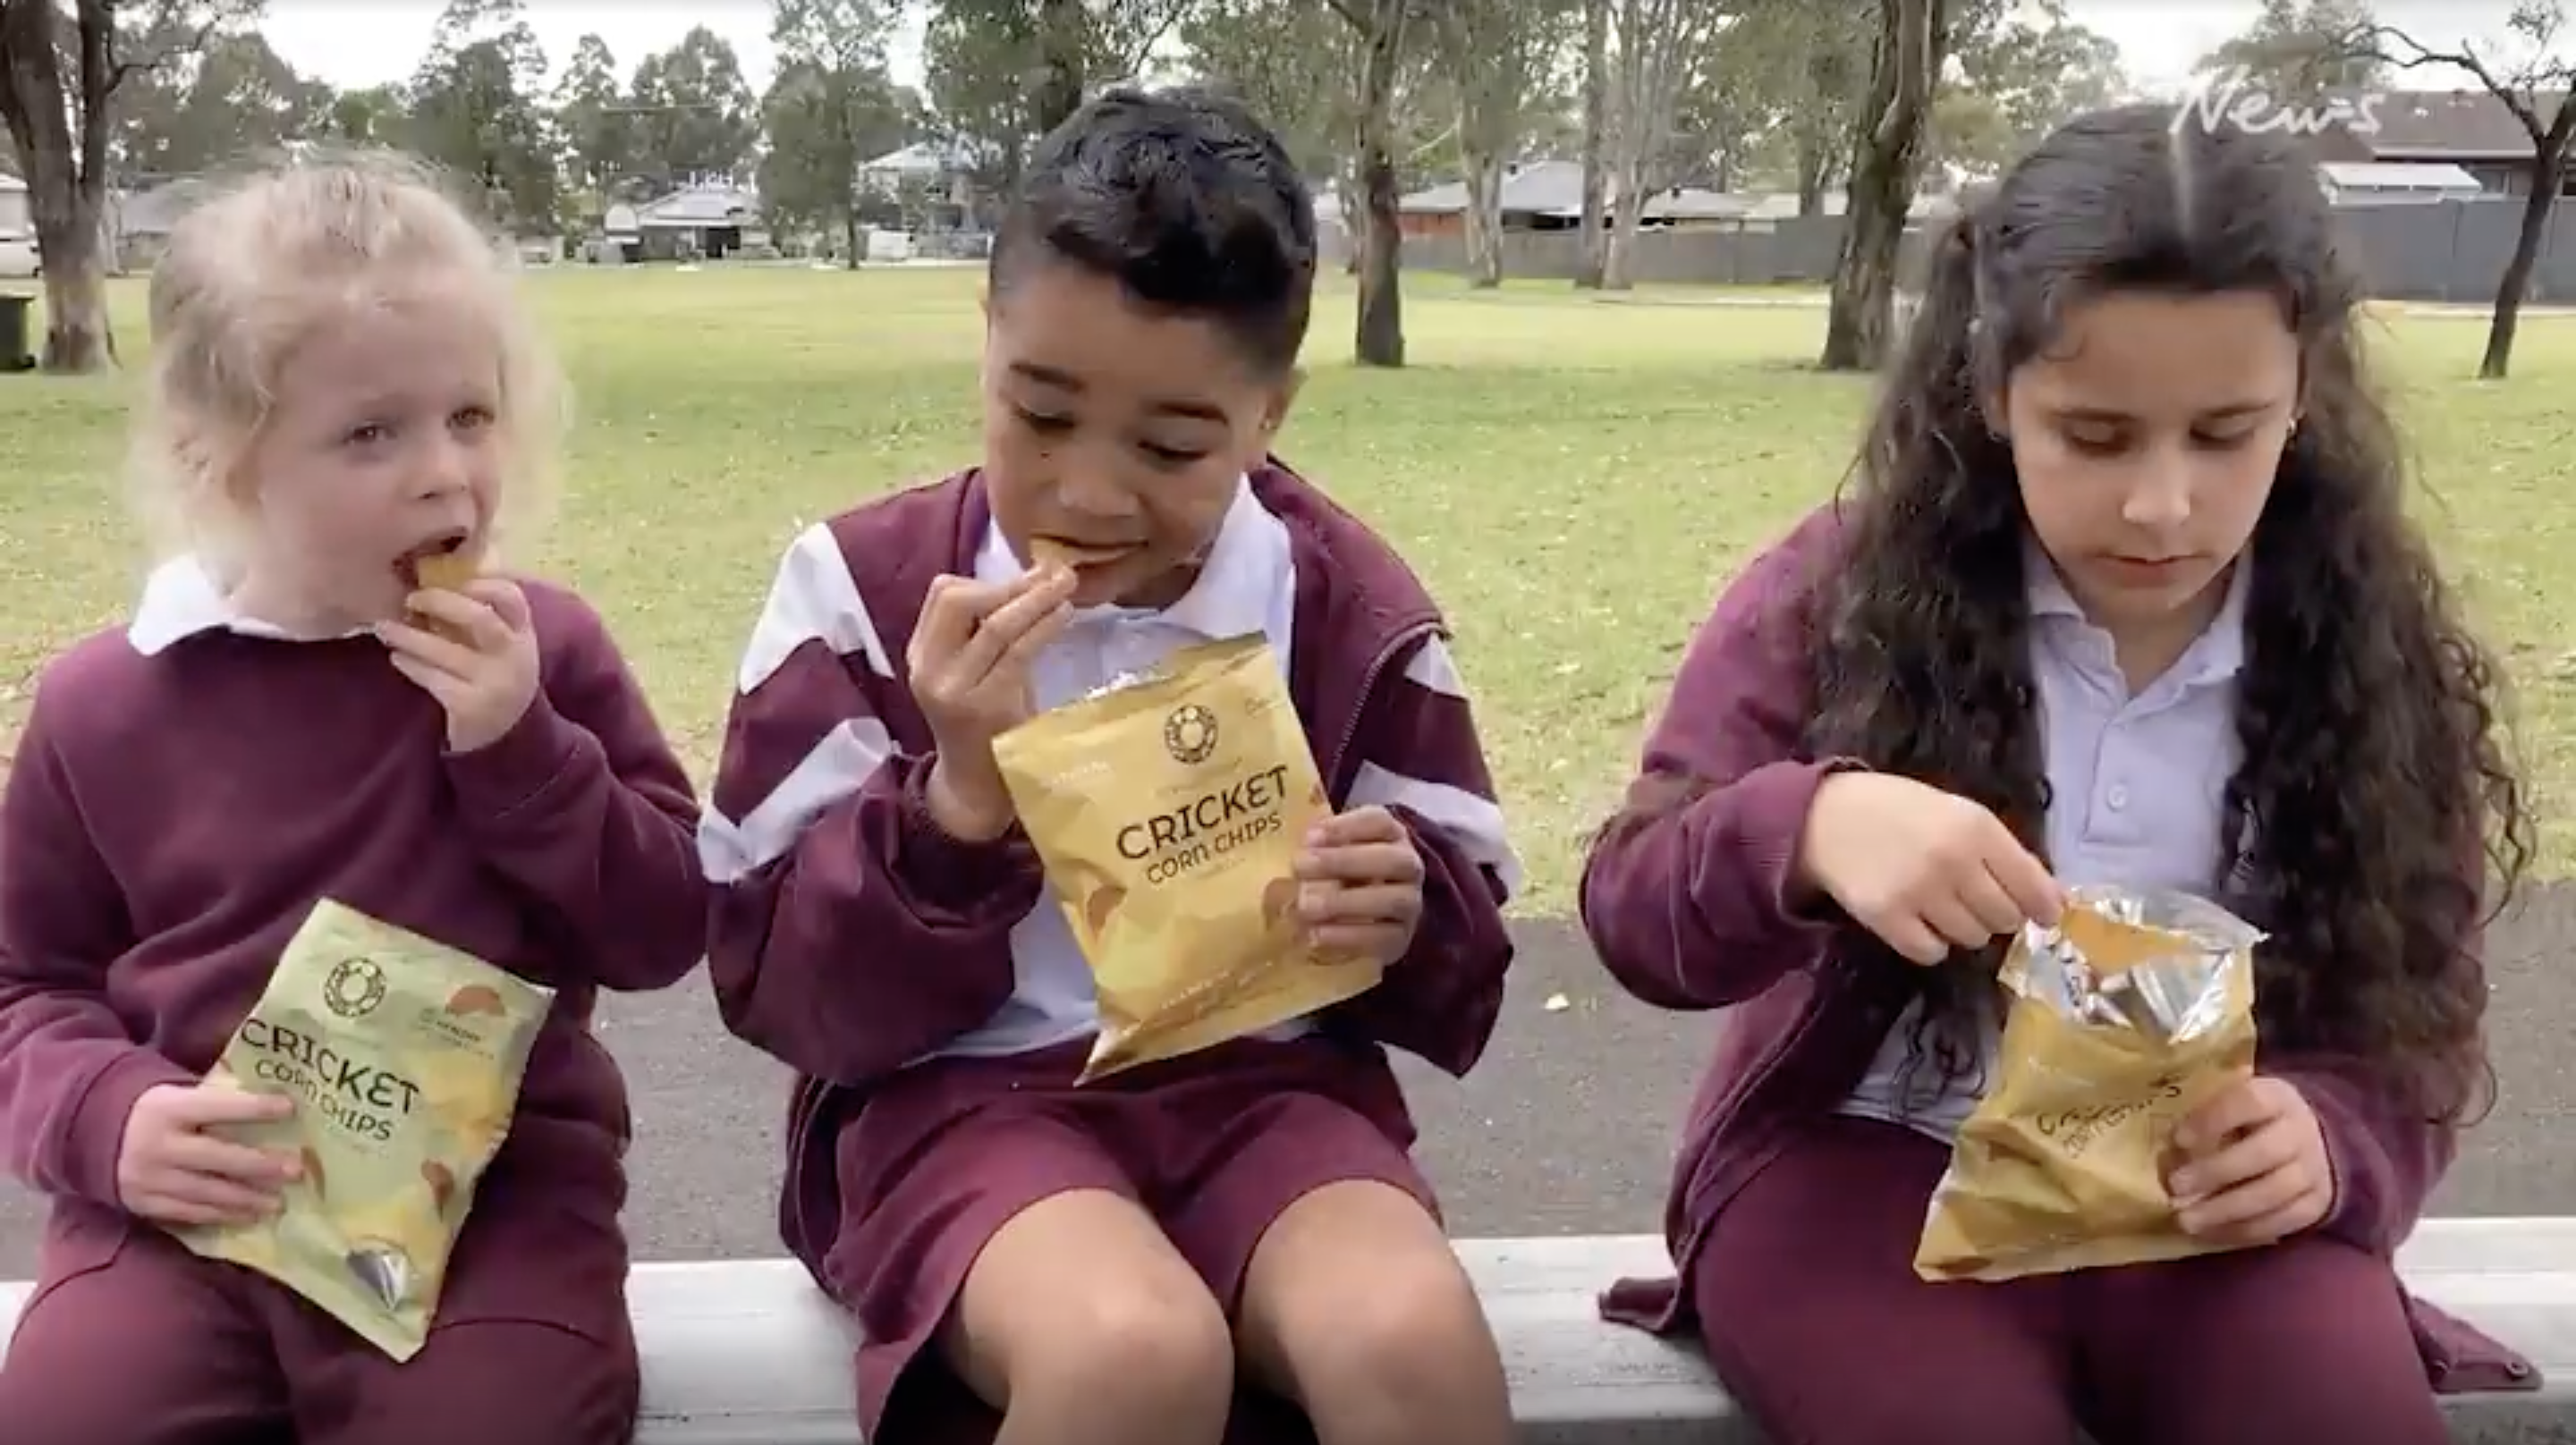 Great Food Reset: Watch: School kids munch on insects as cricket snacks introduced to 1000 schools to ‘help save the planet from global warming’